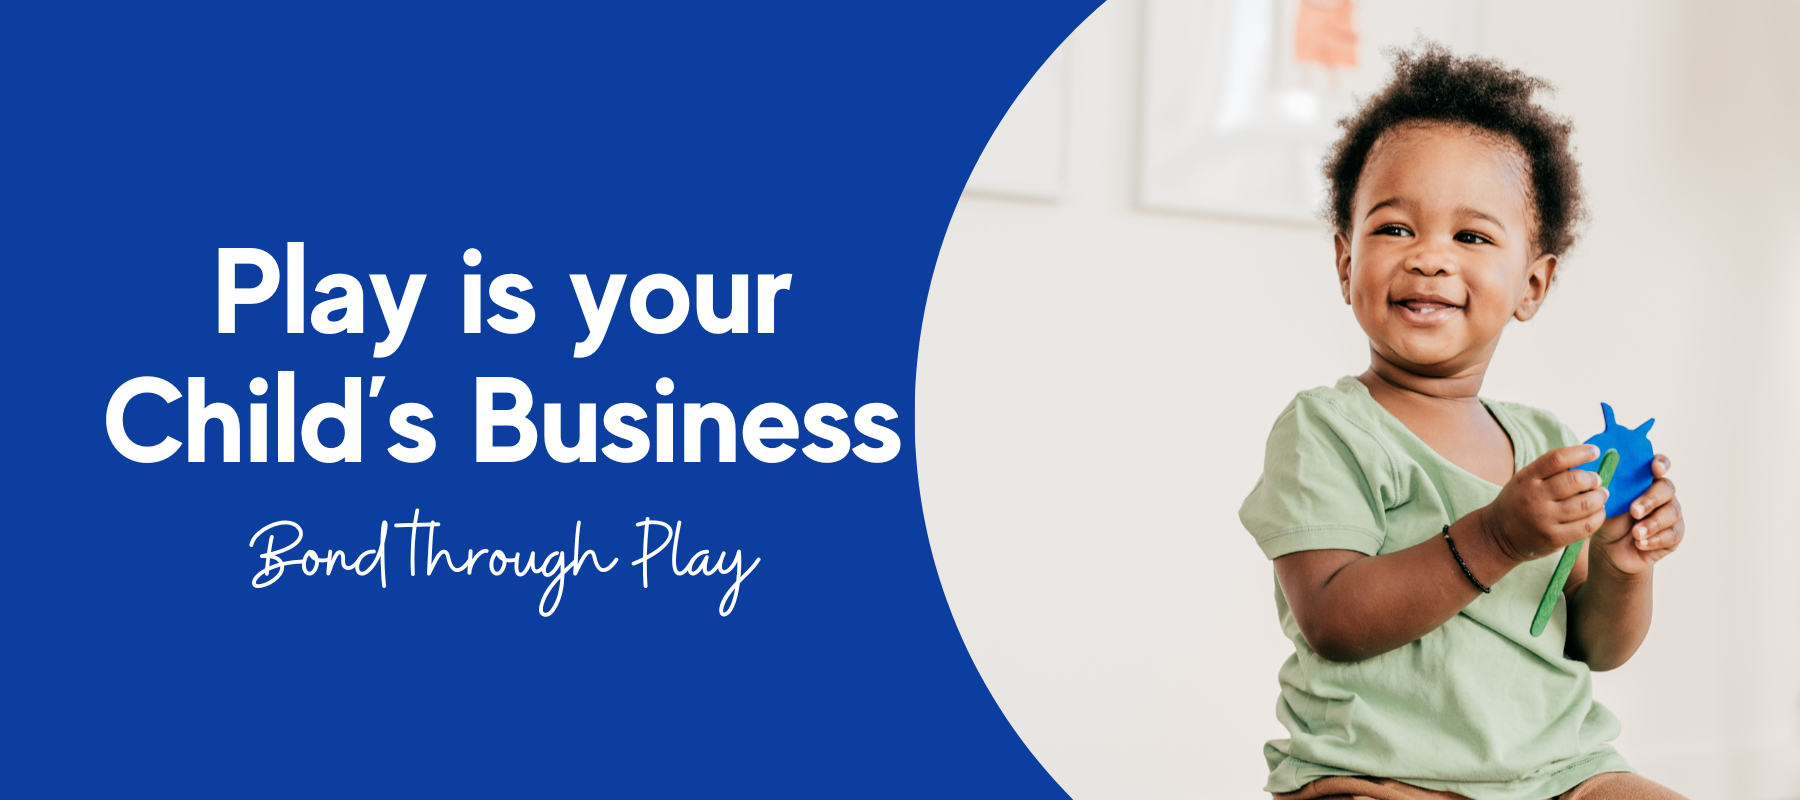 Play is your Child’s Business